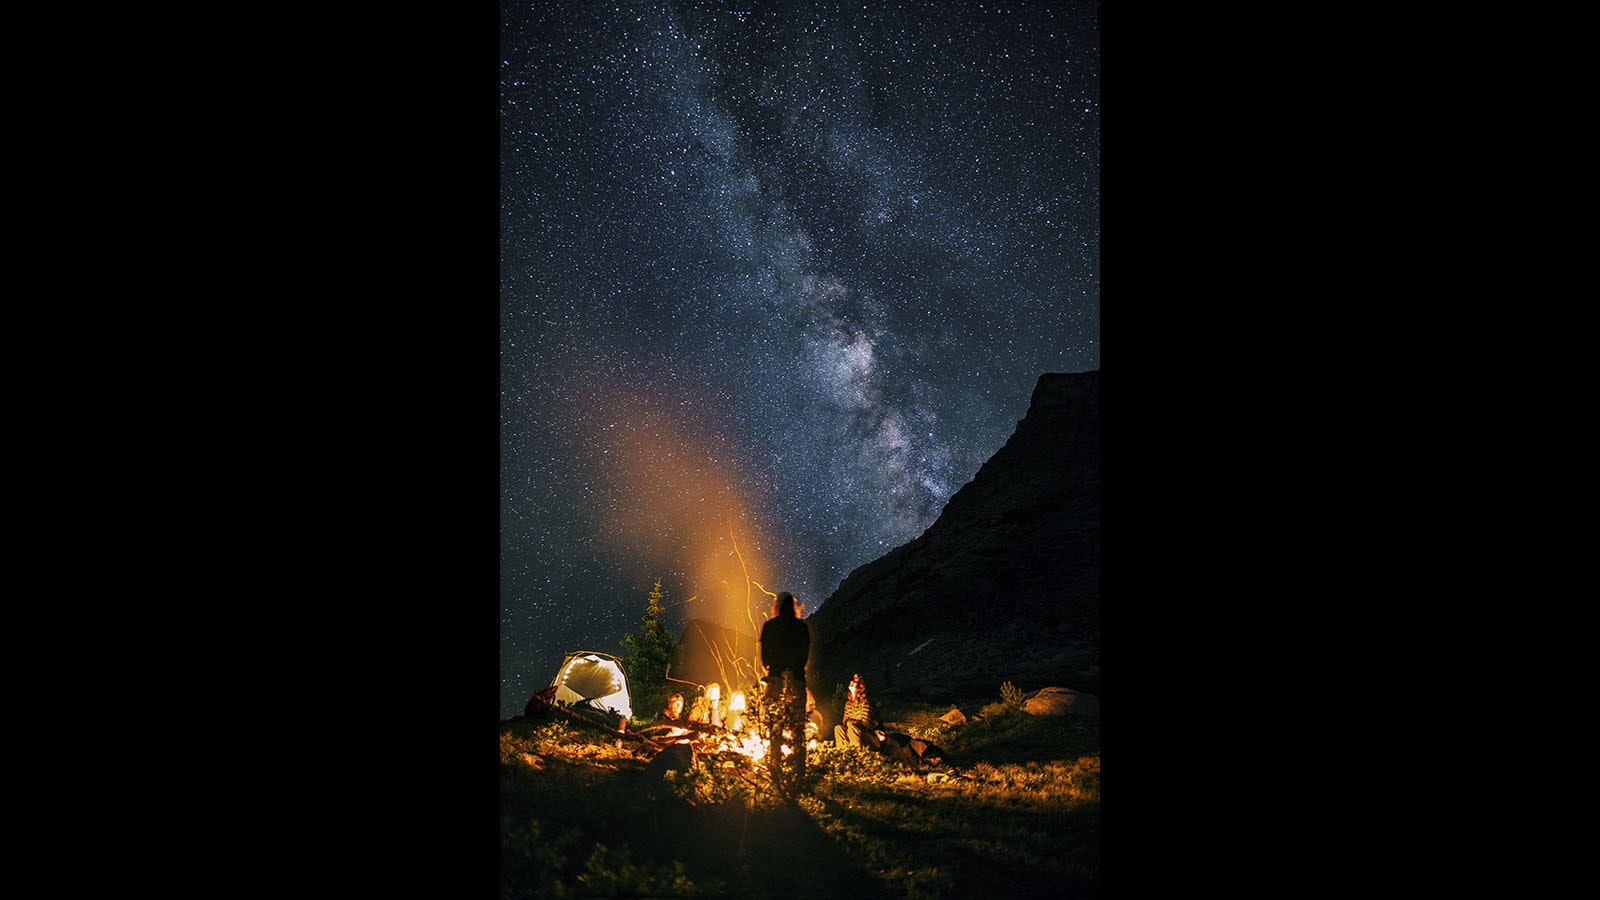 The Milky Way Galaxy as seen in the pristine night skies over Wyoming. This shot shows the light from a campfire on a backdrop of the Milky Way.